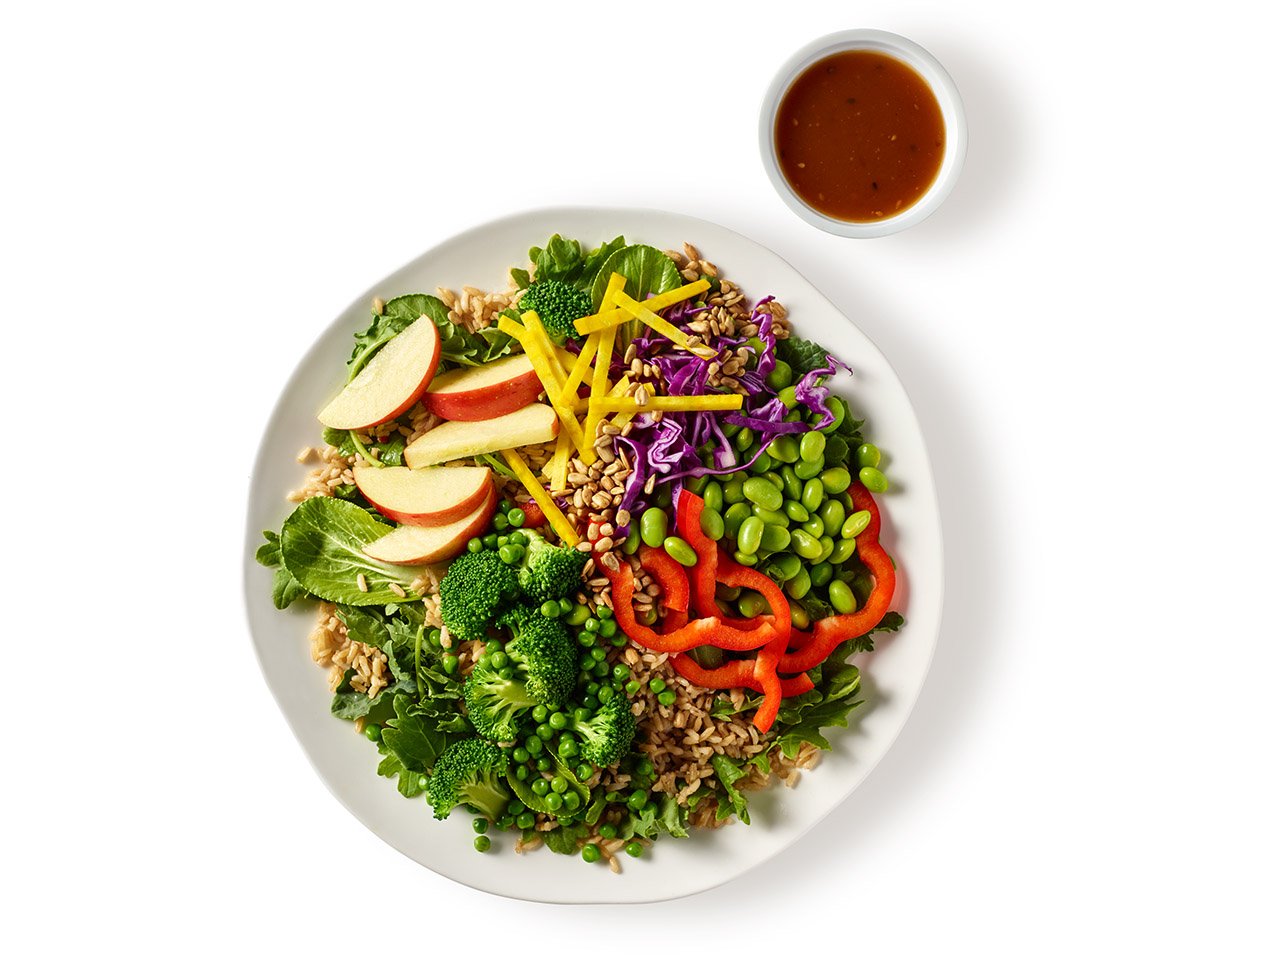 Baby Greens and Brown Rice Protein Bowl with sauce on side — healthiest items to order at starbucks